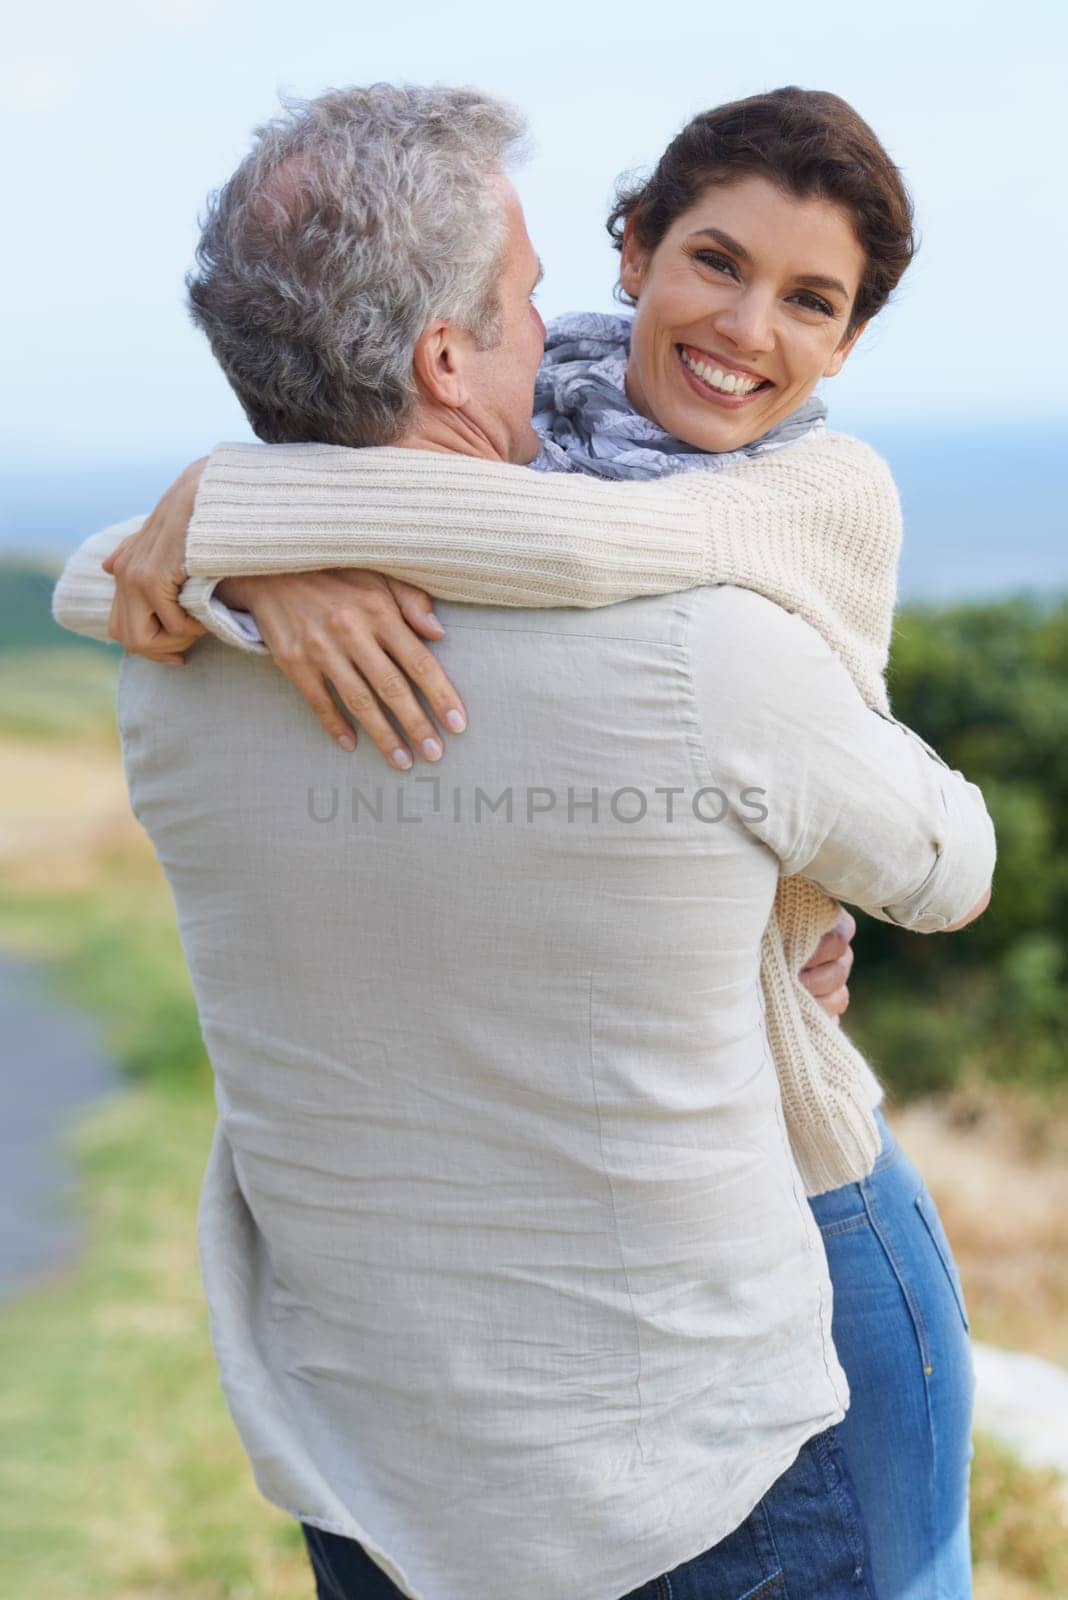 Love in the sunshine. A loving couple hugging each other affectionately outdoors